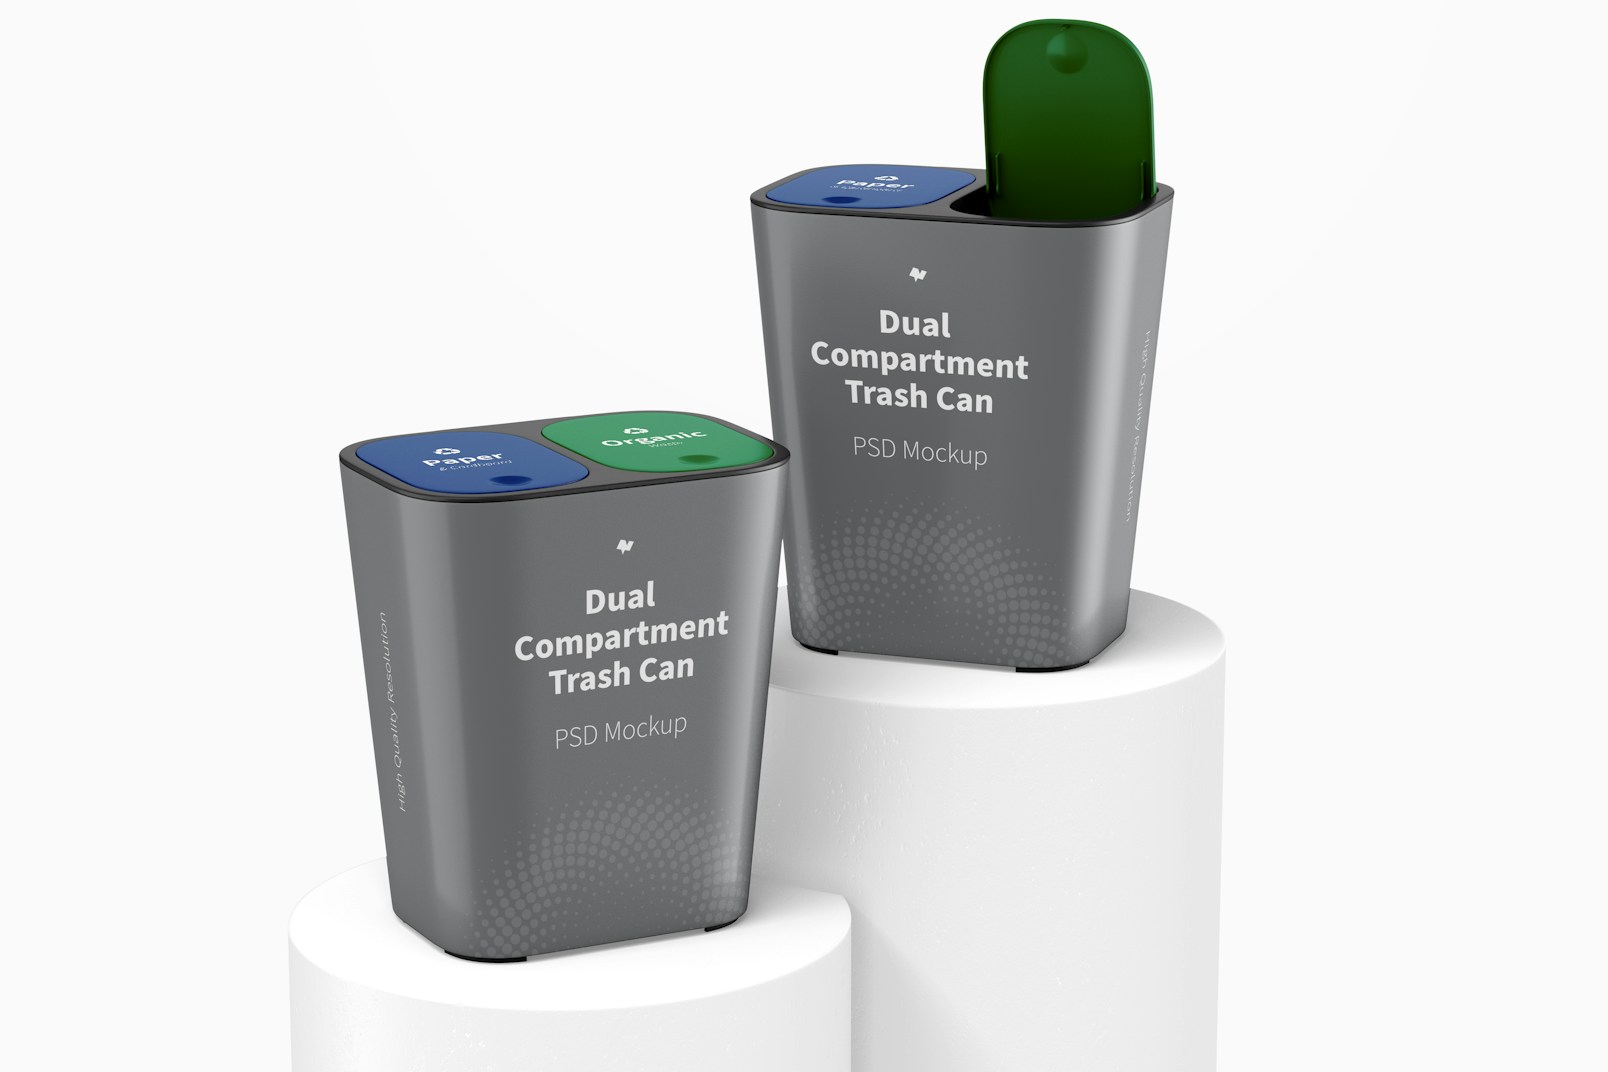 Dual Compartment Trash Can on Surfaces Mockup